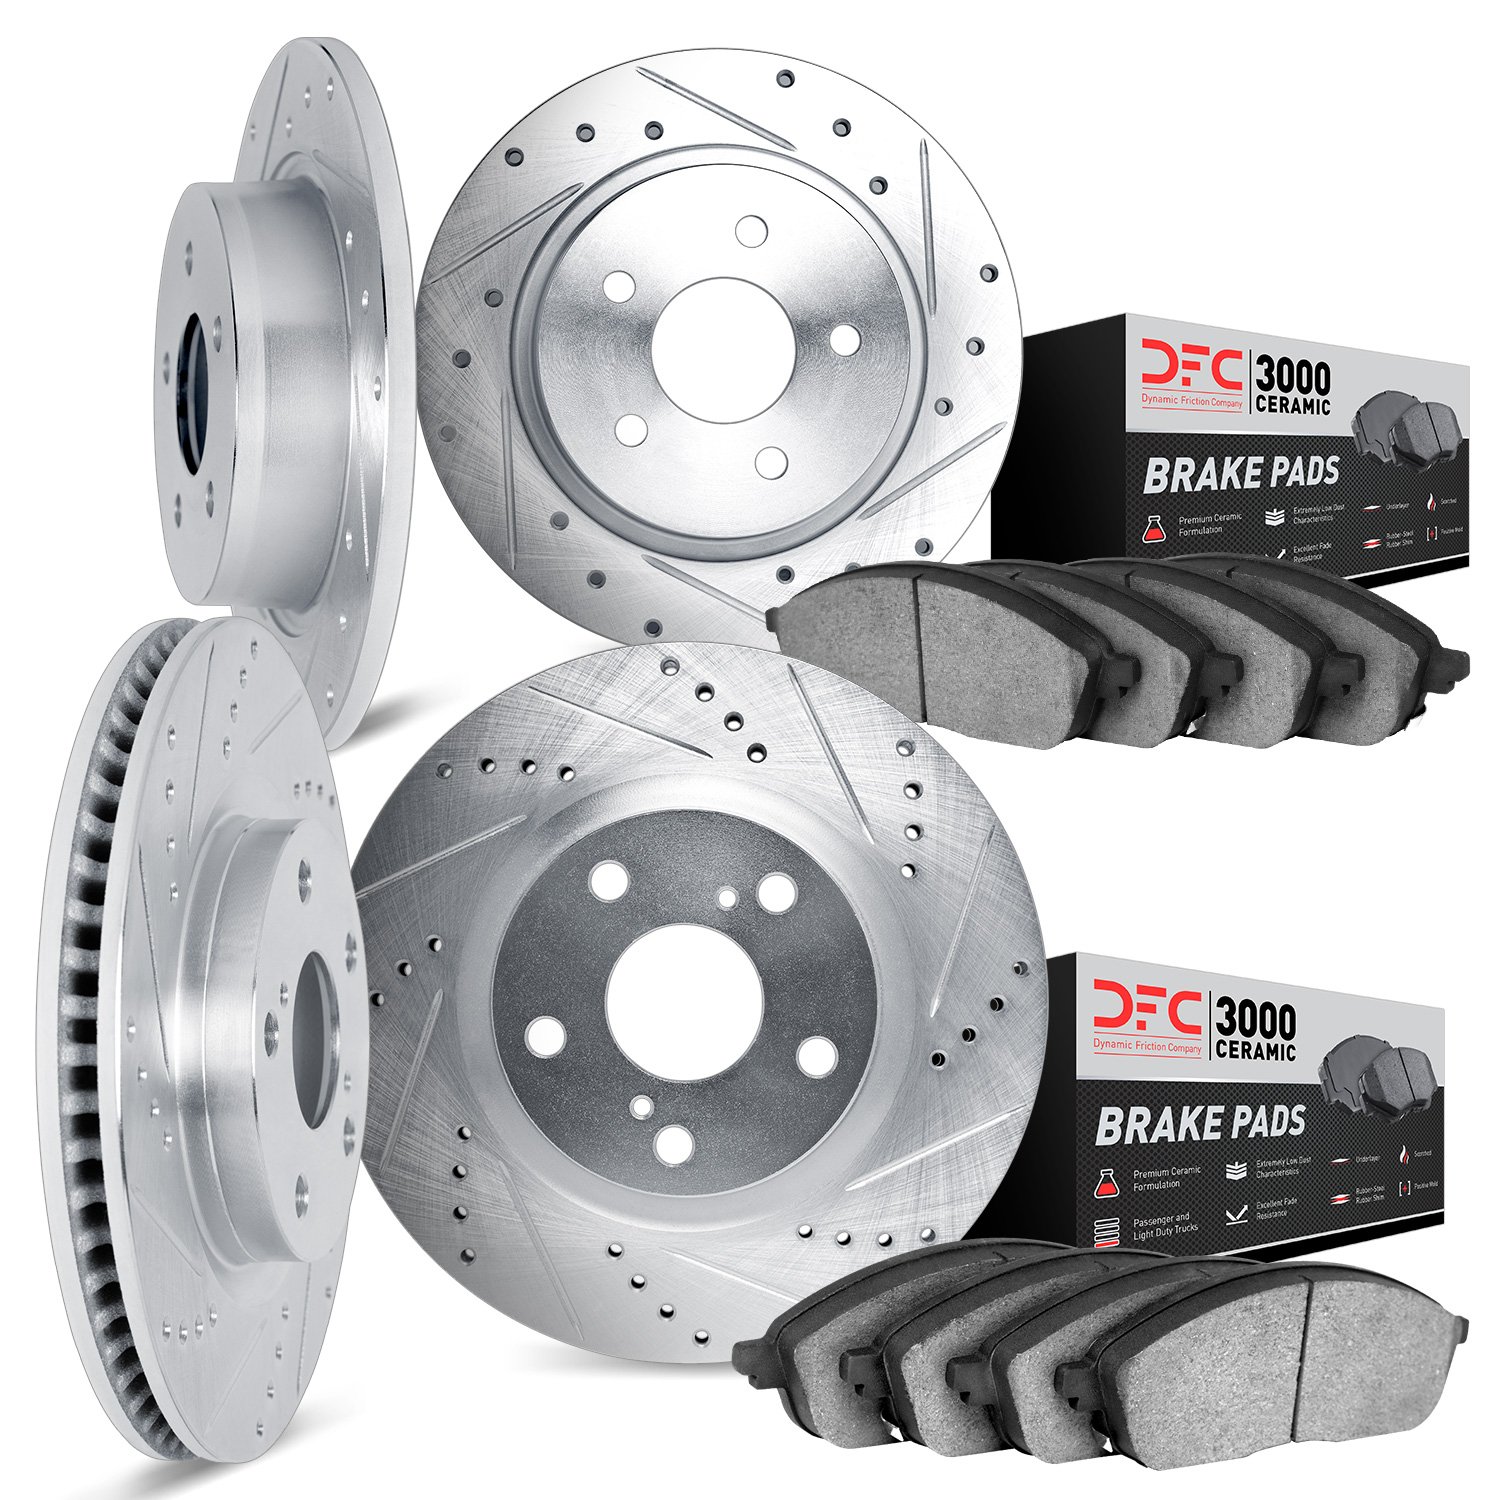 7304-76054 Drilled/Slotted Brake Rotor with 3000-Series Ceramic Brake Pads Kit [Silver], 2004-2008 Lexus/Toyota/Scion, Position: